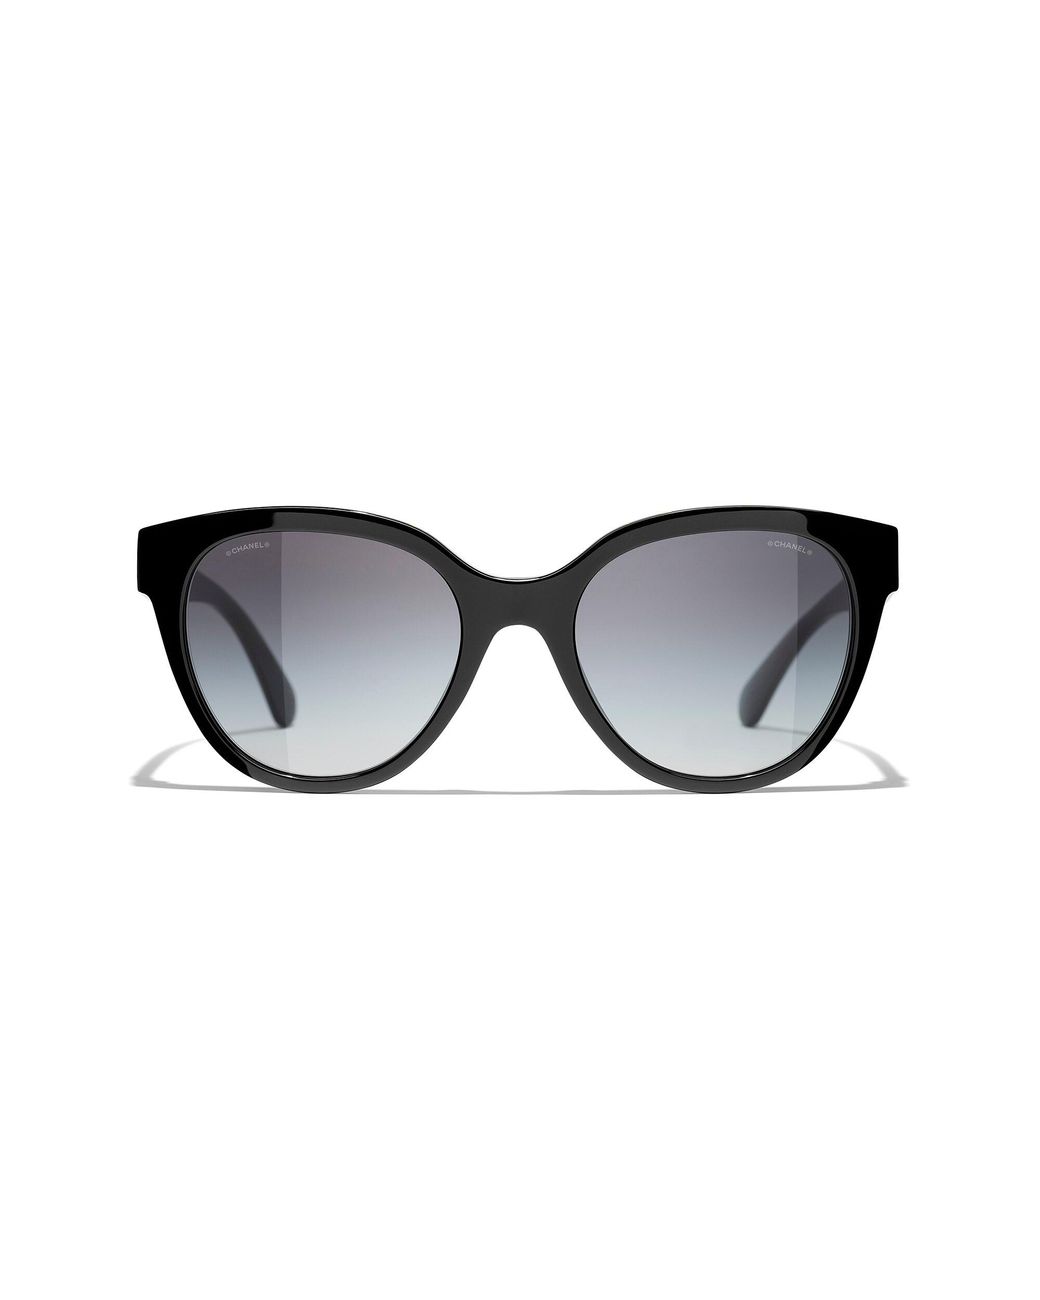 Chanel Sunglass Butterfly Sunglasses Ch5414 in Black